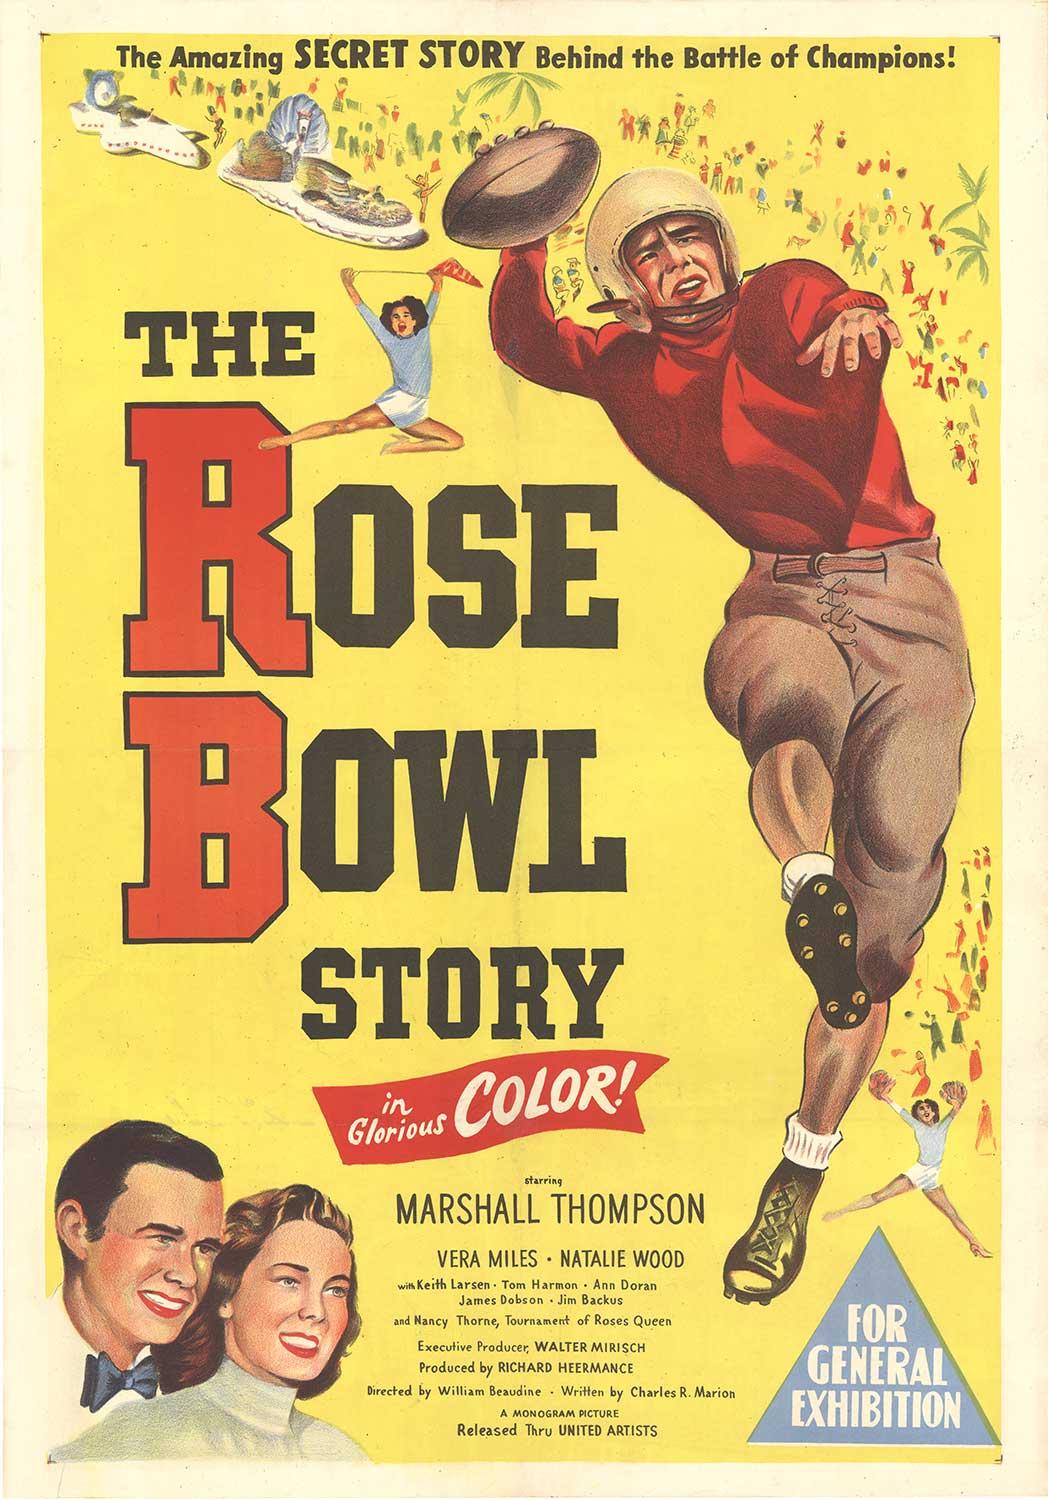 Unknown Portrait Print - Original "The Rose Bowl Story" vintage Football movie poster  US 1 sheet